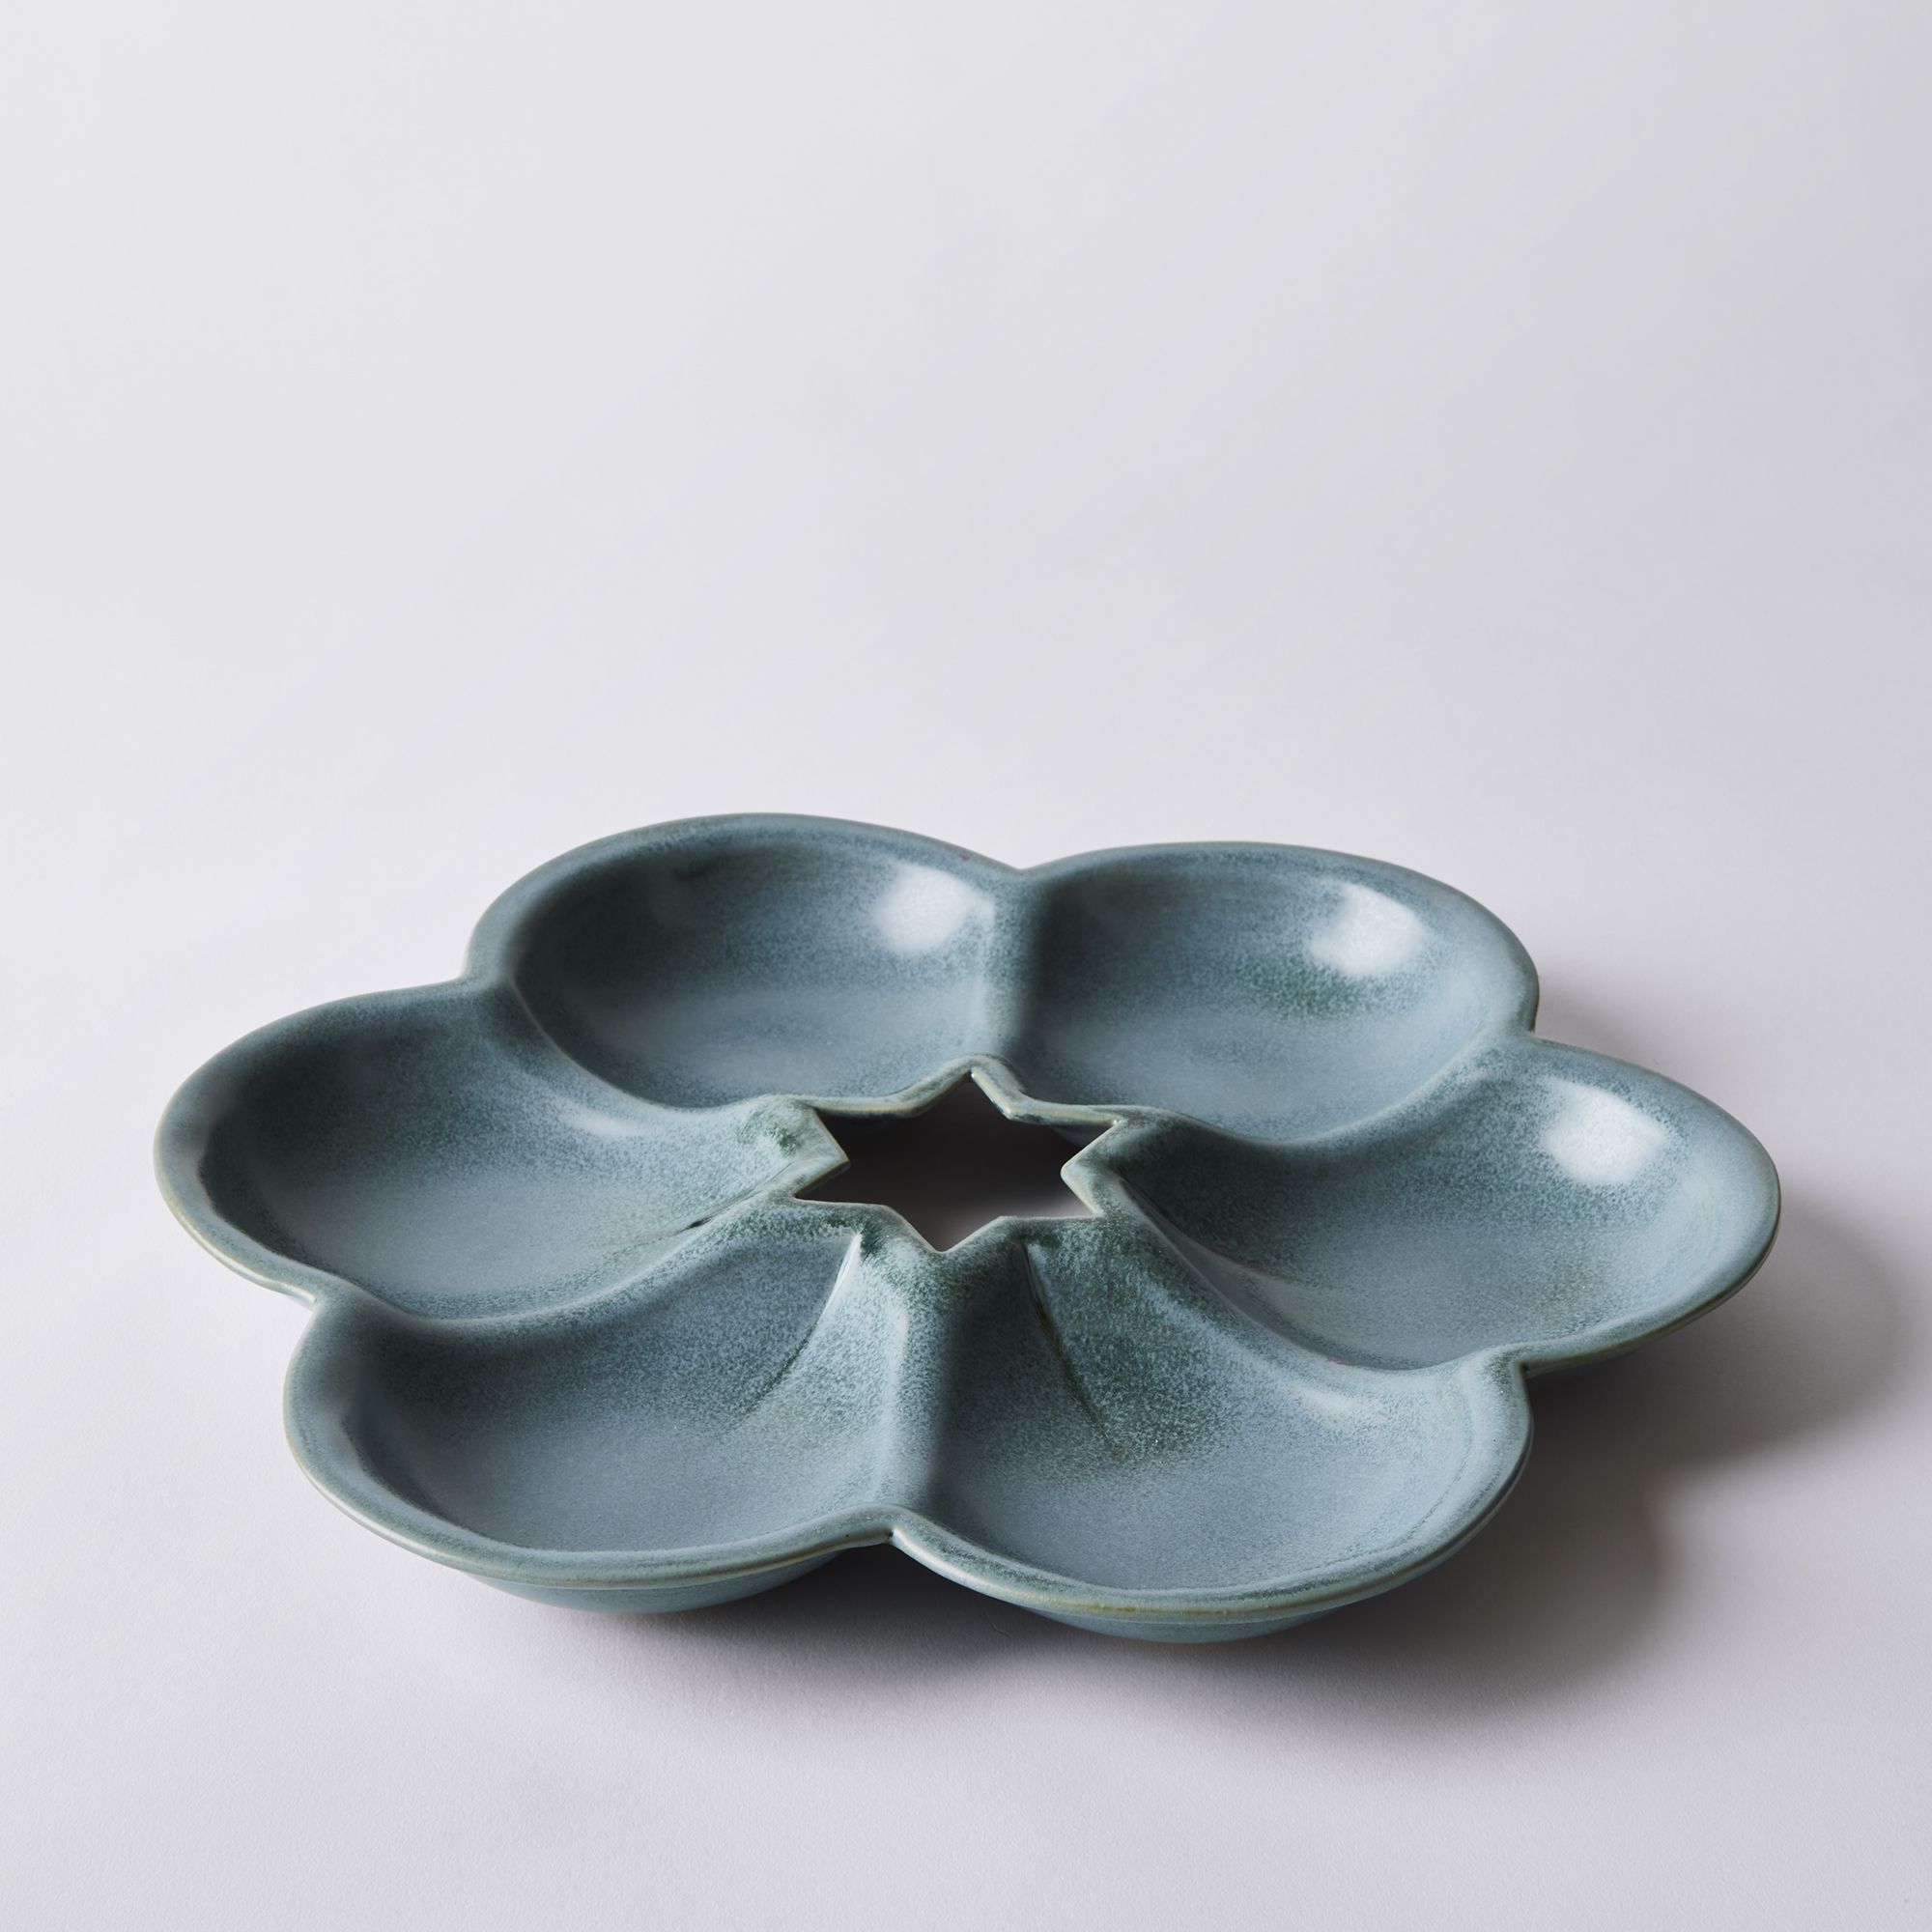 Plates by Channon Coats